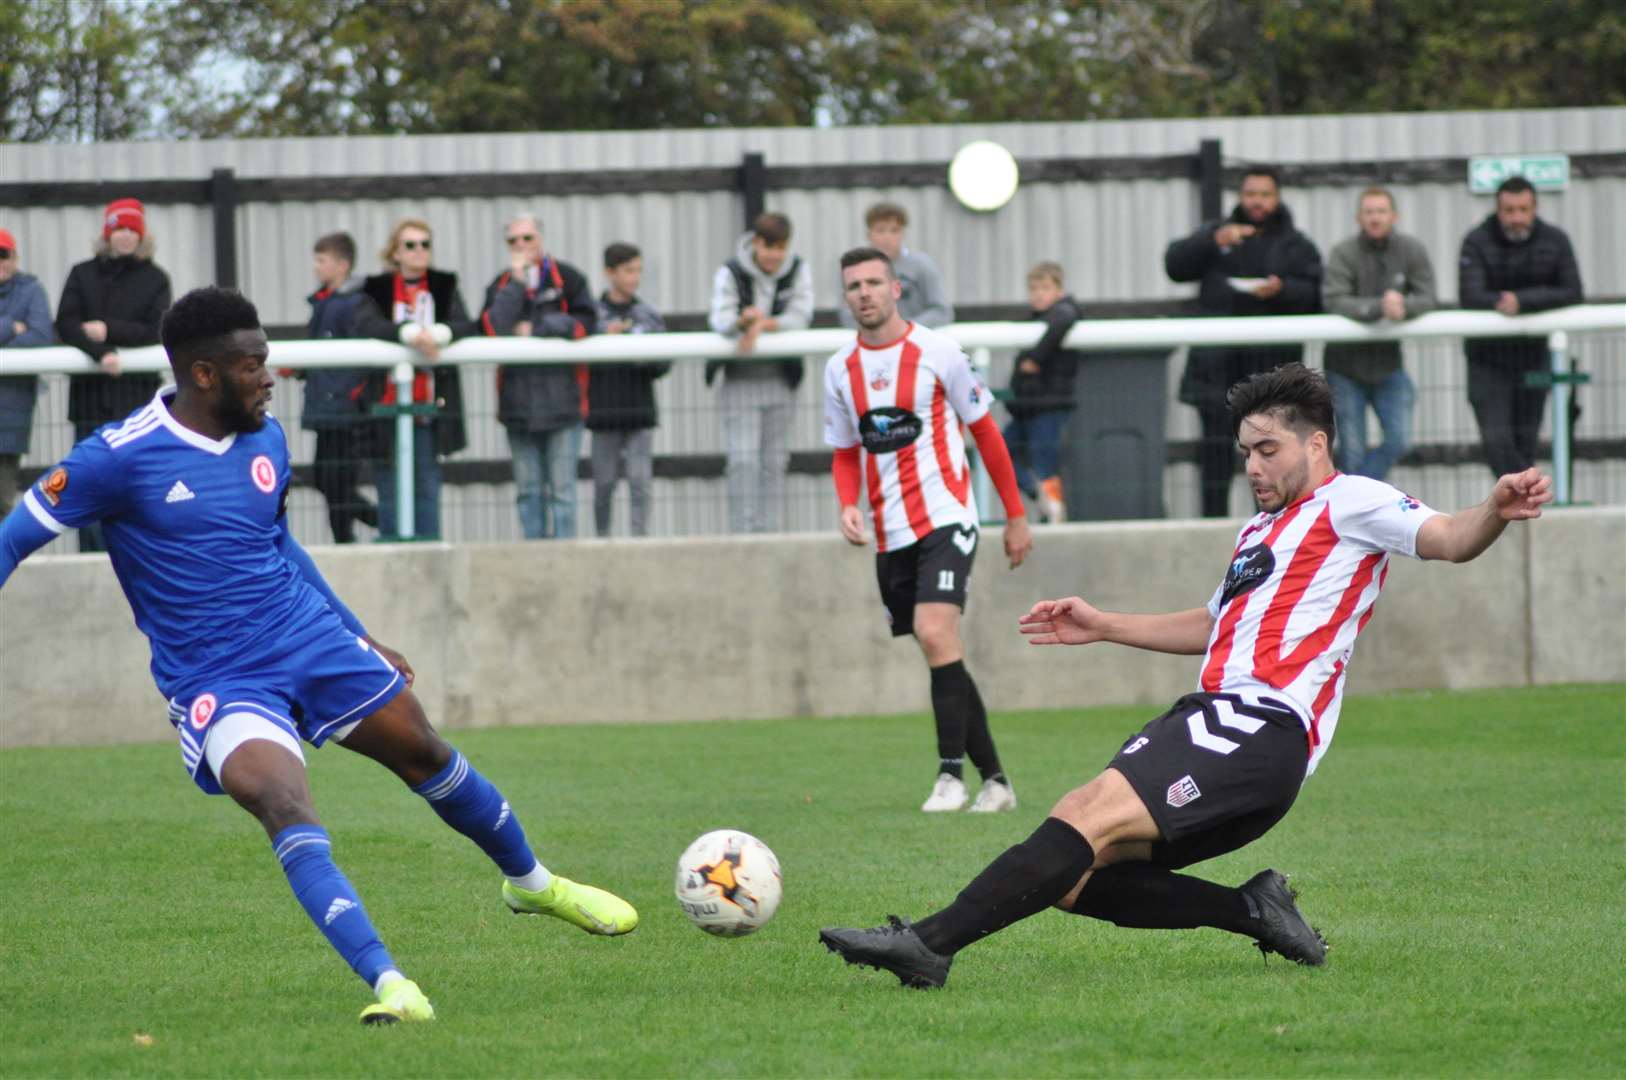 Sheppey United up against Welling United in the last round Picture: Paul Owen Richards (42662400)